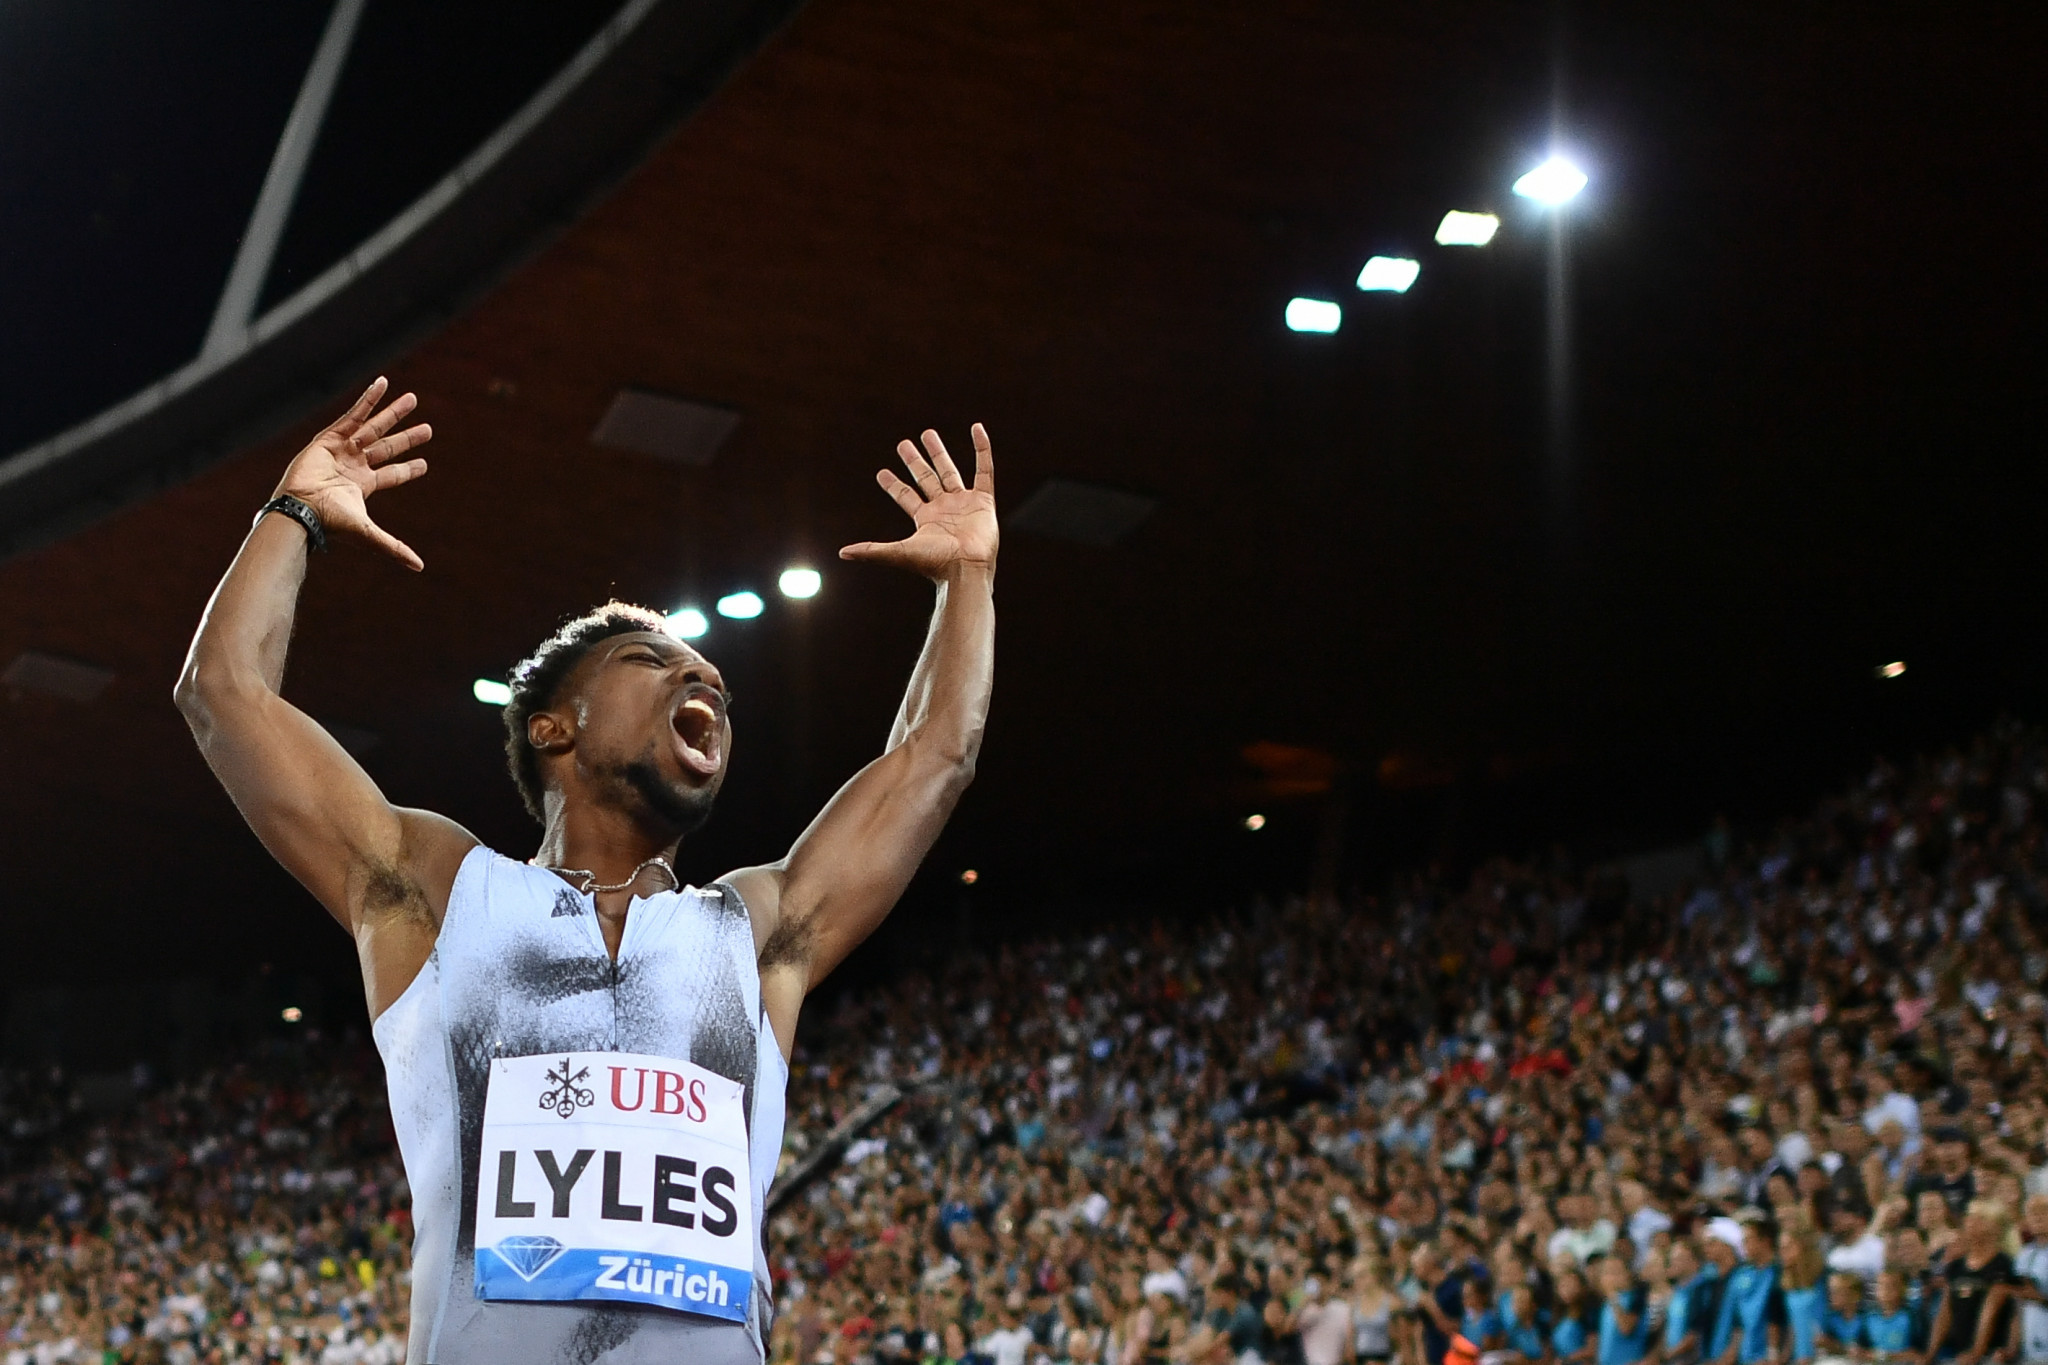  Lyles looking for third consecutive Diamond League 200m title in Brussels